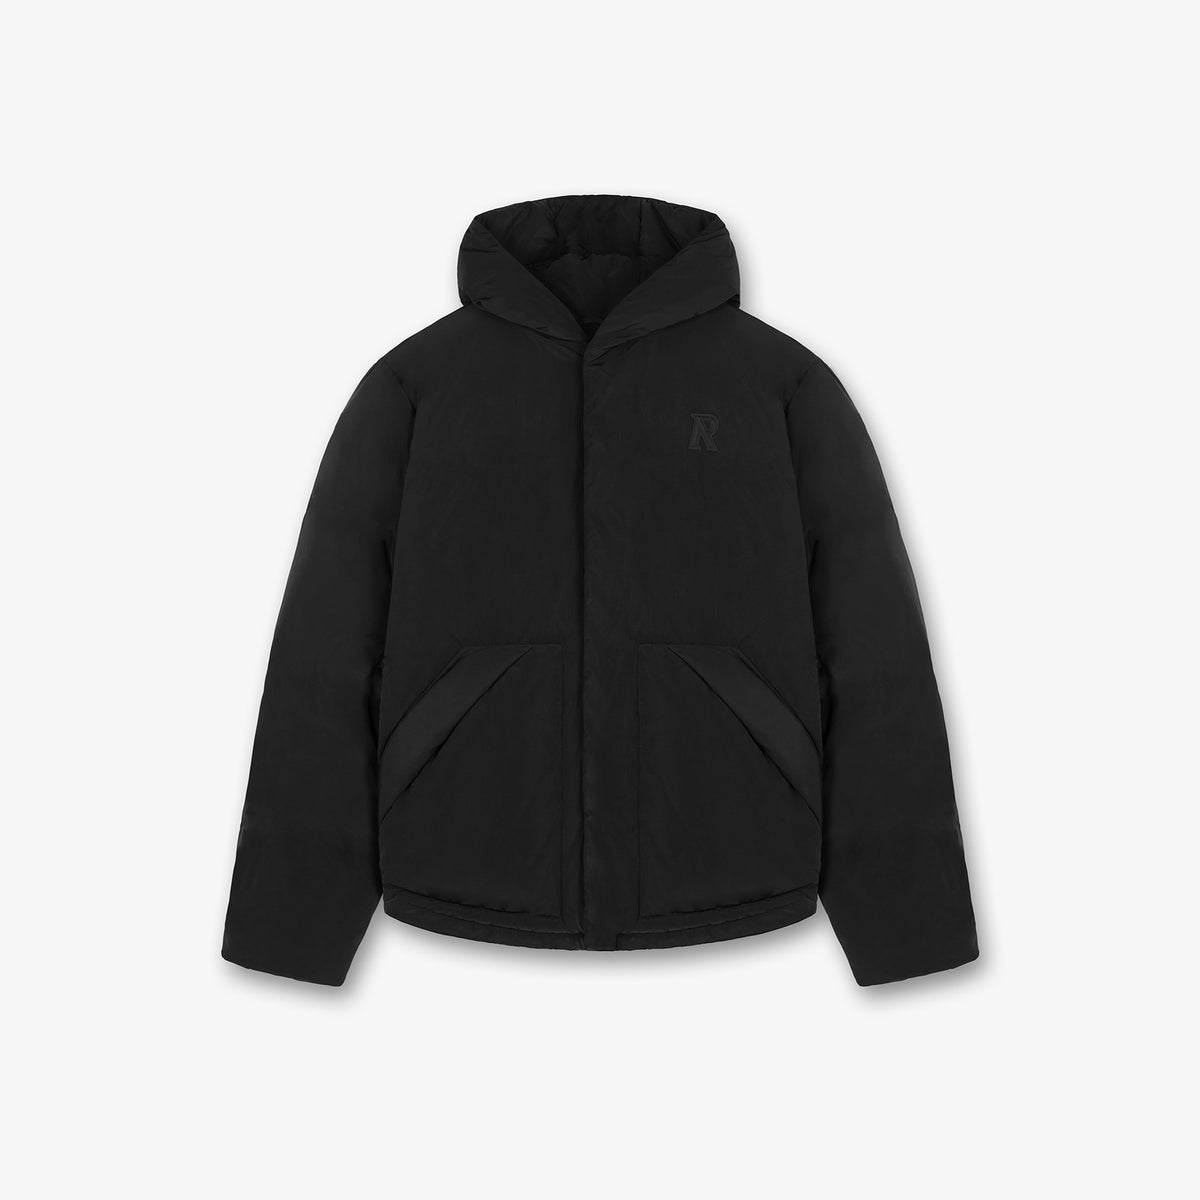 Black Hooded Puffer Jacket | REPRESENT CLO